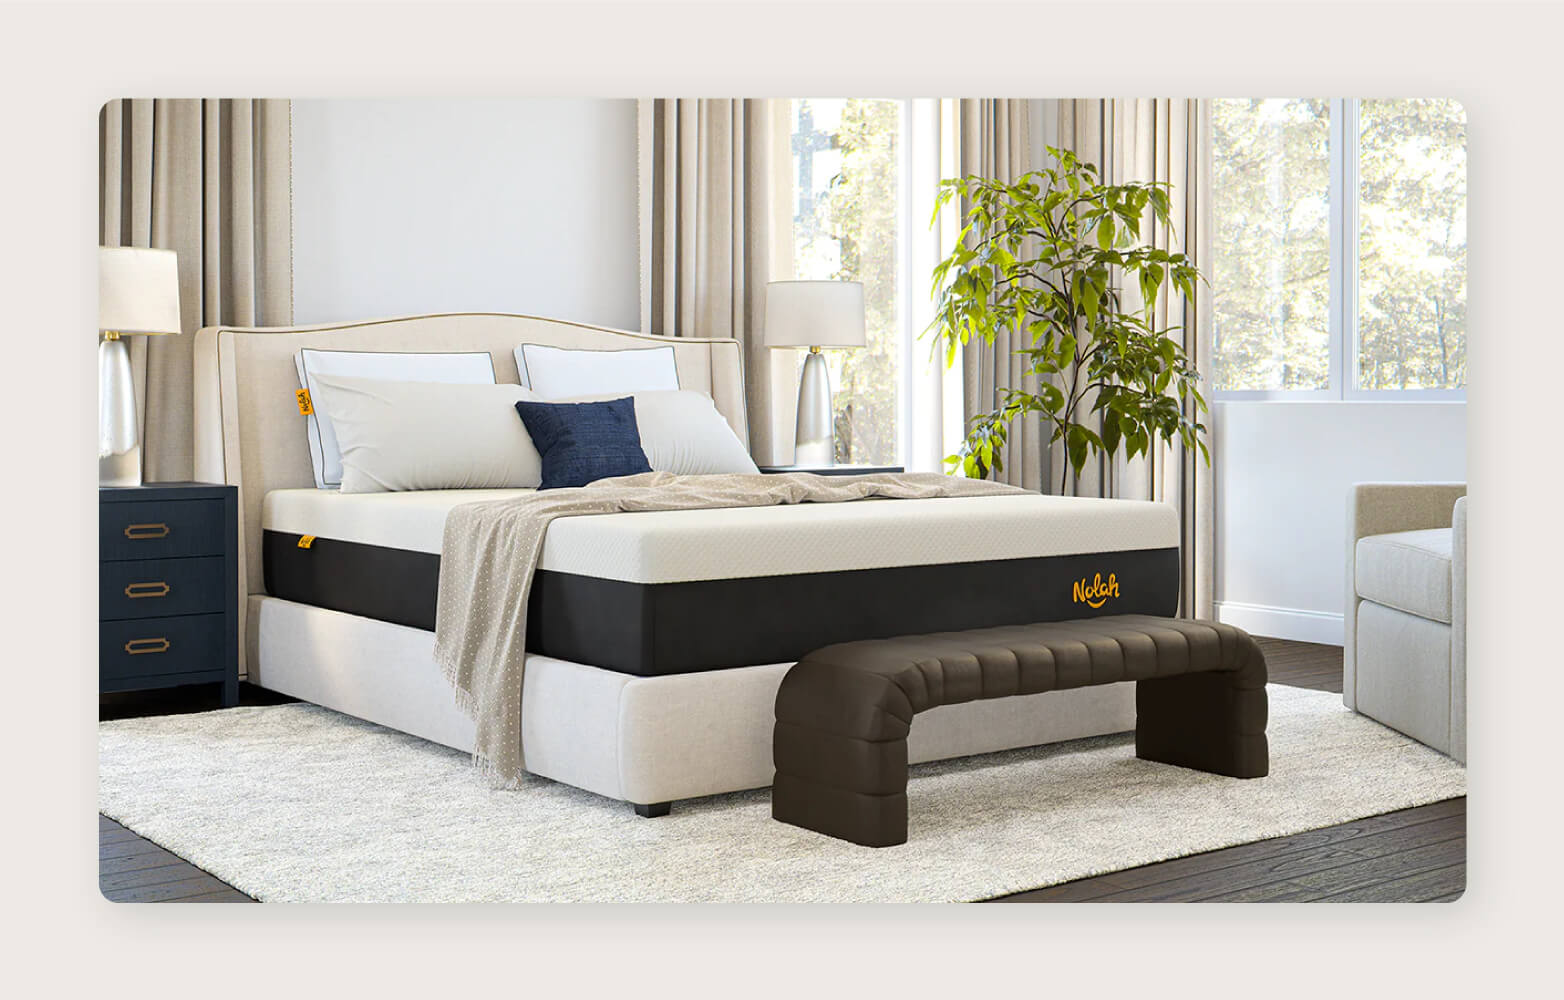 A Nolah Signature Hybrid 12” Mattress with pillows and a throw blanket arranged on top and a dark brown bench at the foot of the bed.